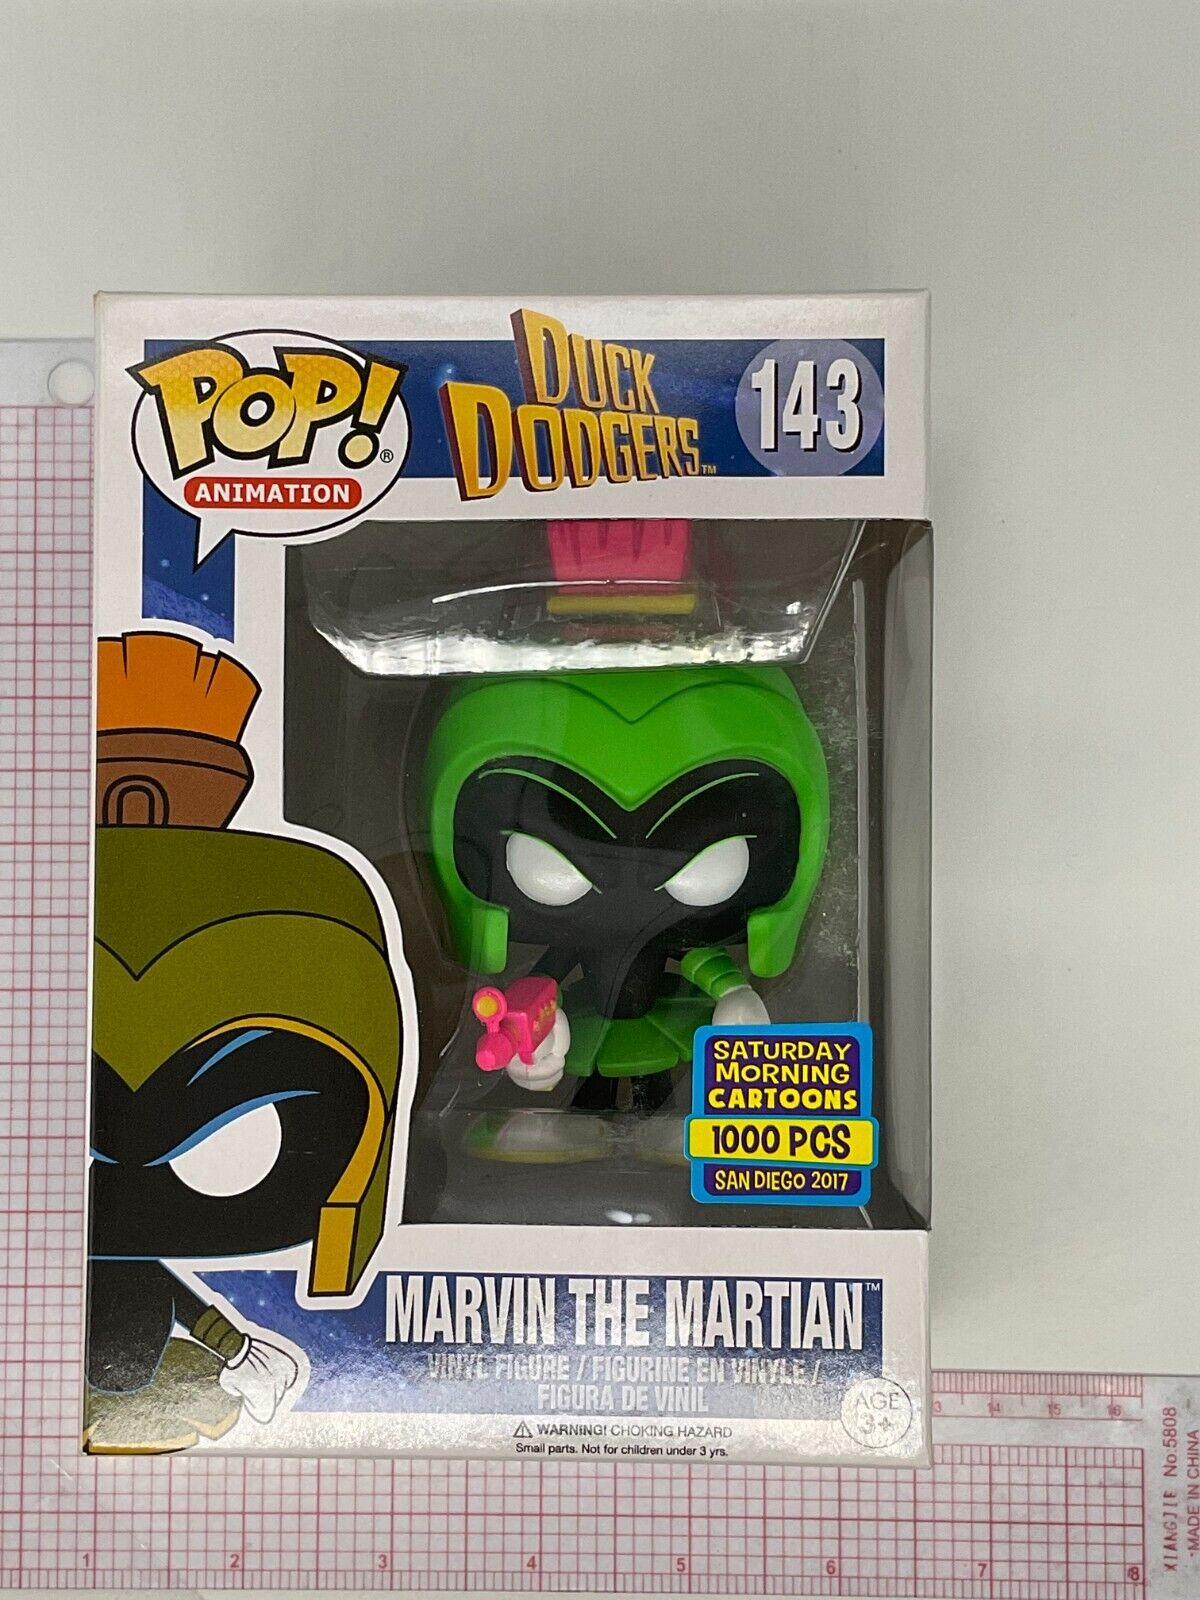 Funko Pop Duck Dodgers Marvin the Martian #143 SDCC Exclusive 1000 PC Neon Green